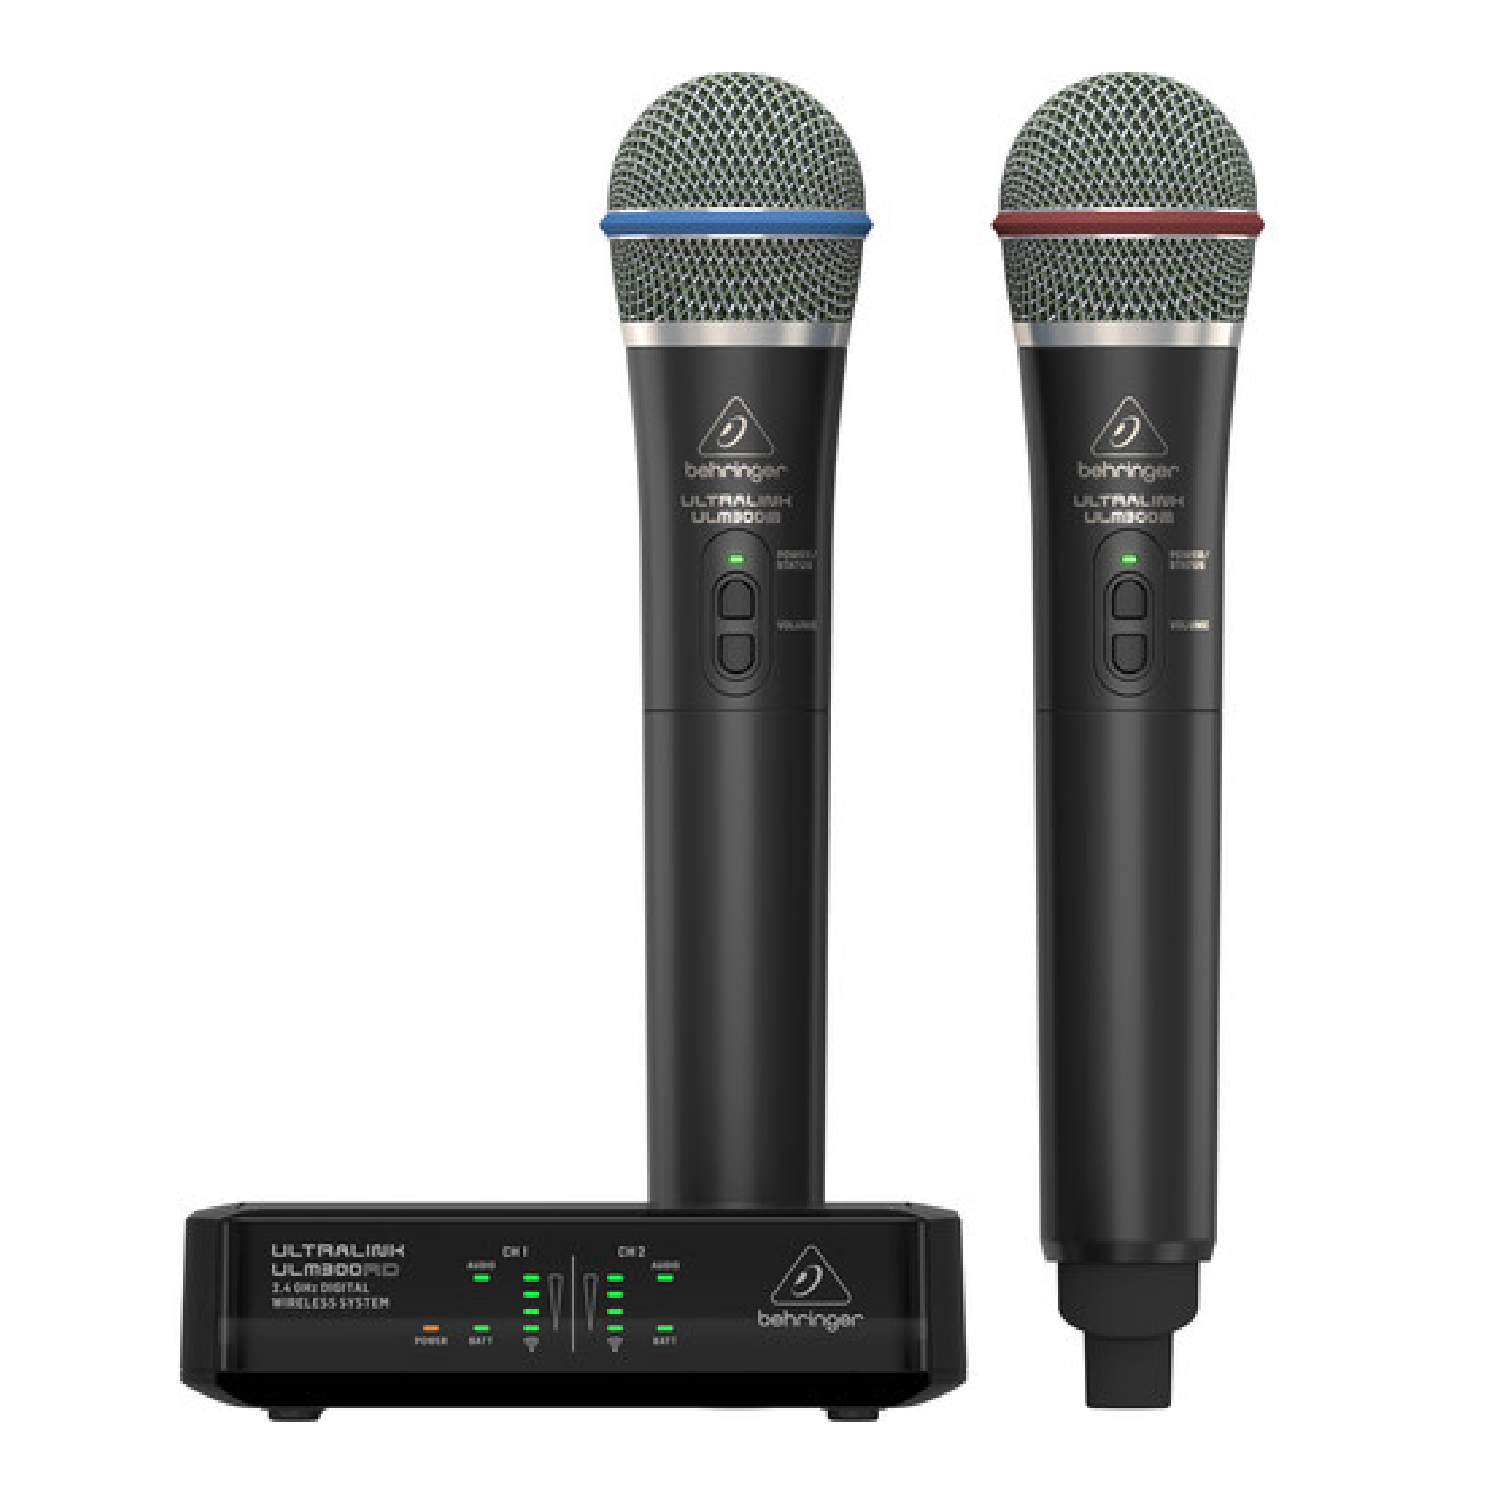 2.4 GHz Digital Wireless System with 2 x Handheld Microphones and 1 x Receiver ULM302MIC behringer